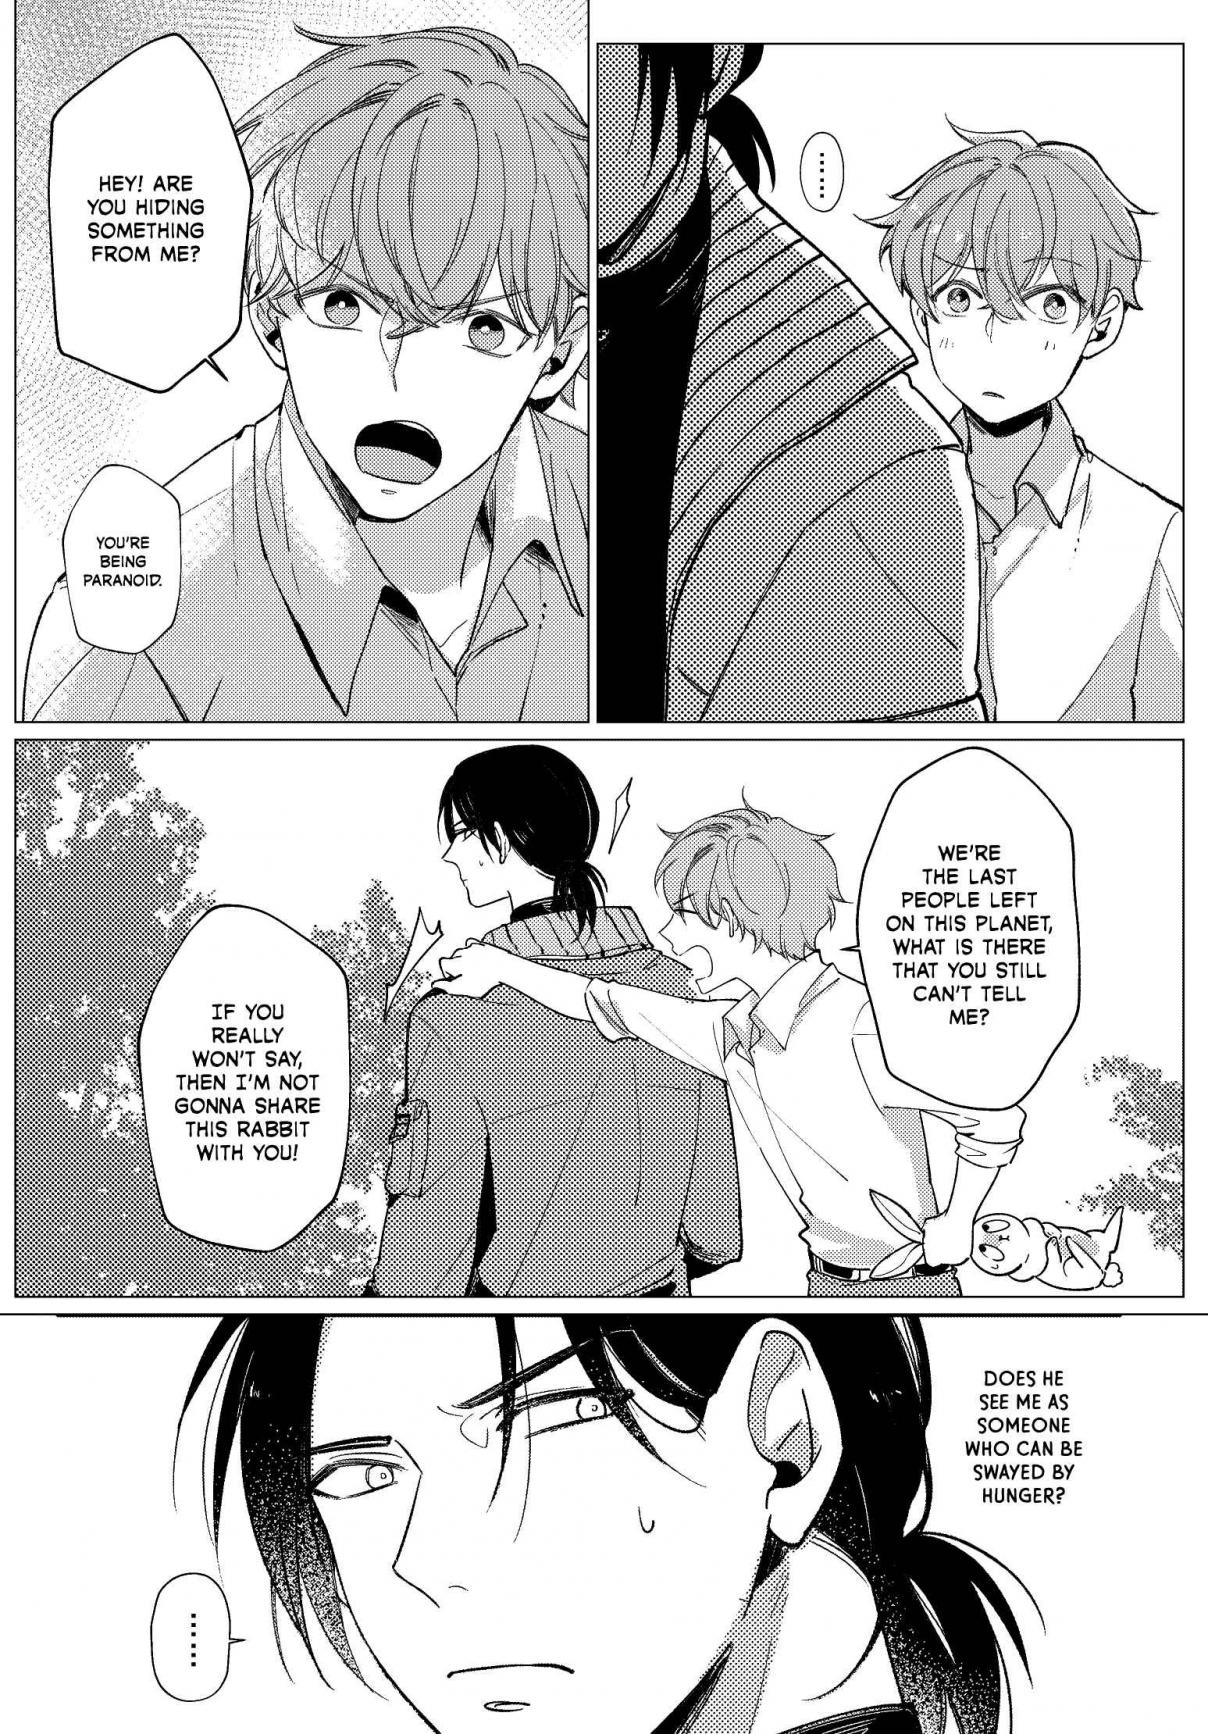 At The End Of The World, I Still Want To Be With You Vol. 1 Ch. 2 Day 2